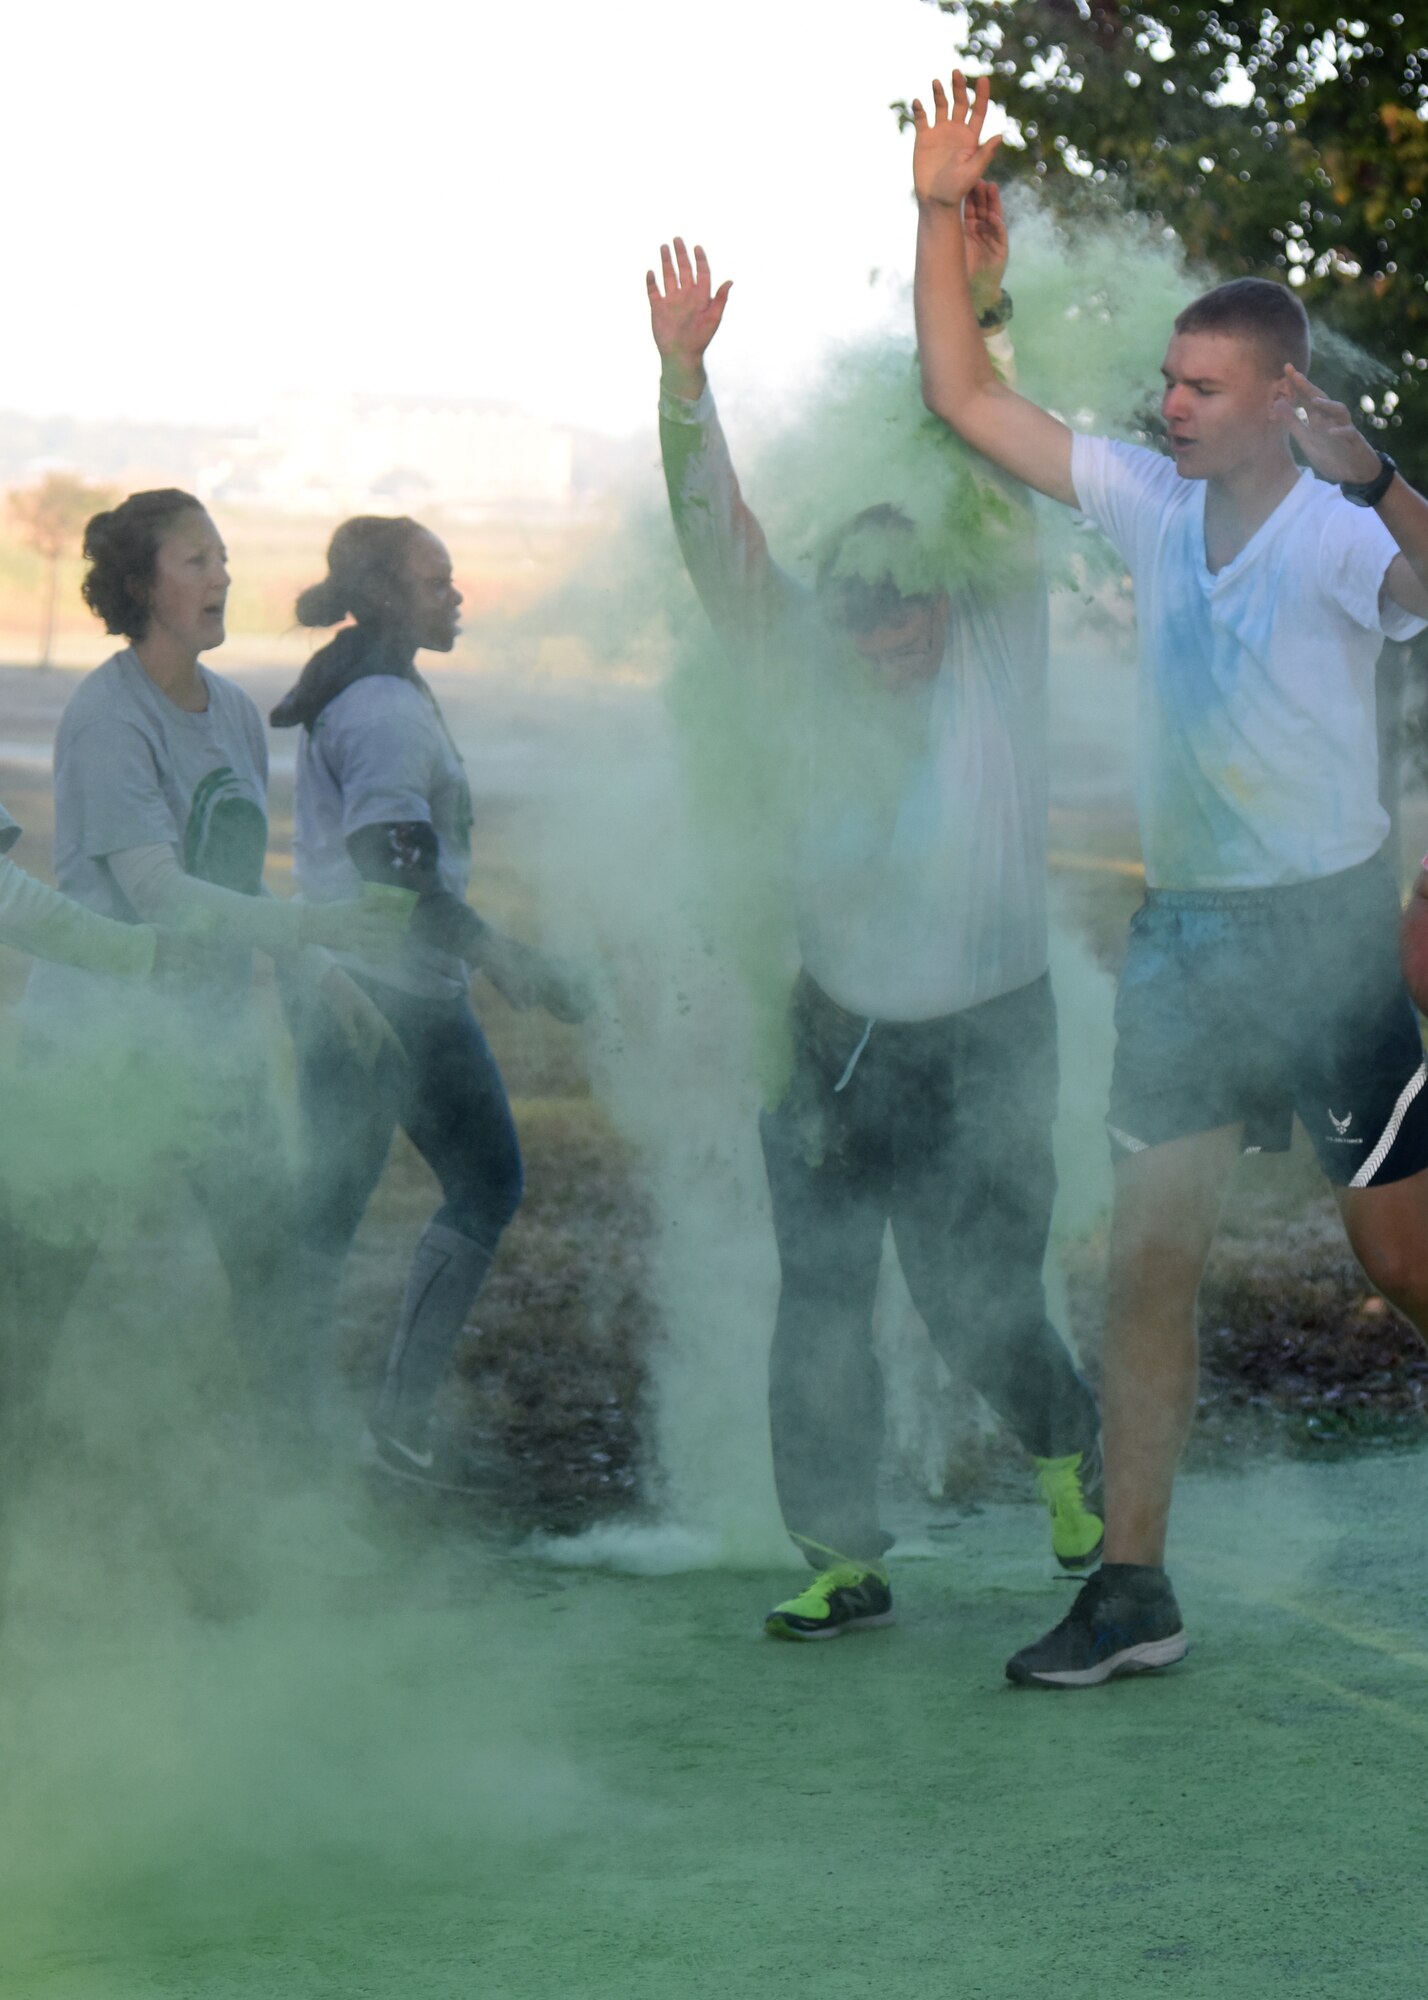 Keesler personnel run through green powder during an 81st Training Wing color run at the Marina Park Nov. 17, 2016, on Keesler Air Force Base, Miss. The run was one of several events held throughout Dragon Week, which focuses on resiliency and teambuilding initiatives across the base. (U.S. Air Force photo by Kemberly Groue/Released)